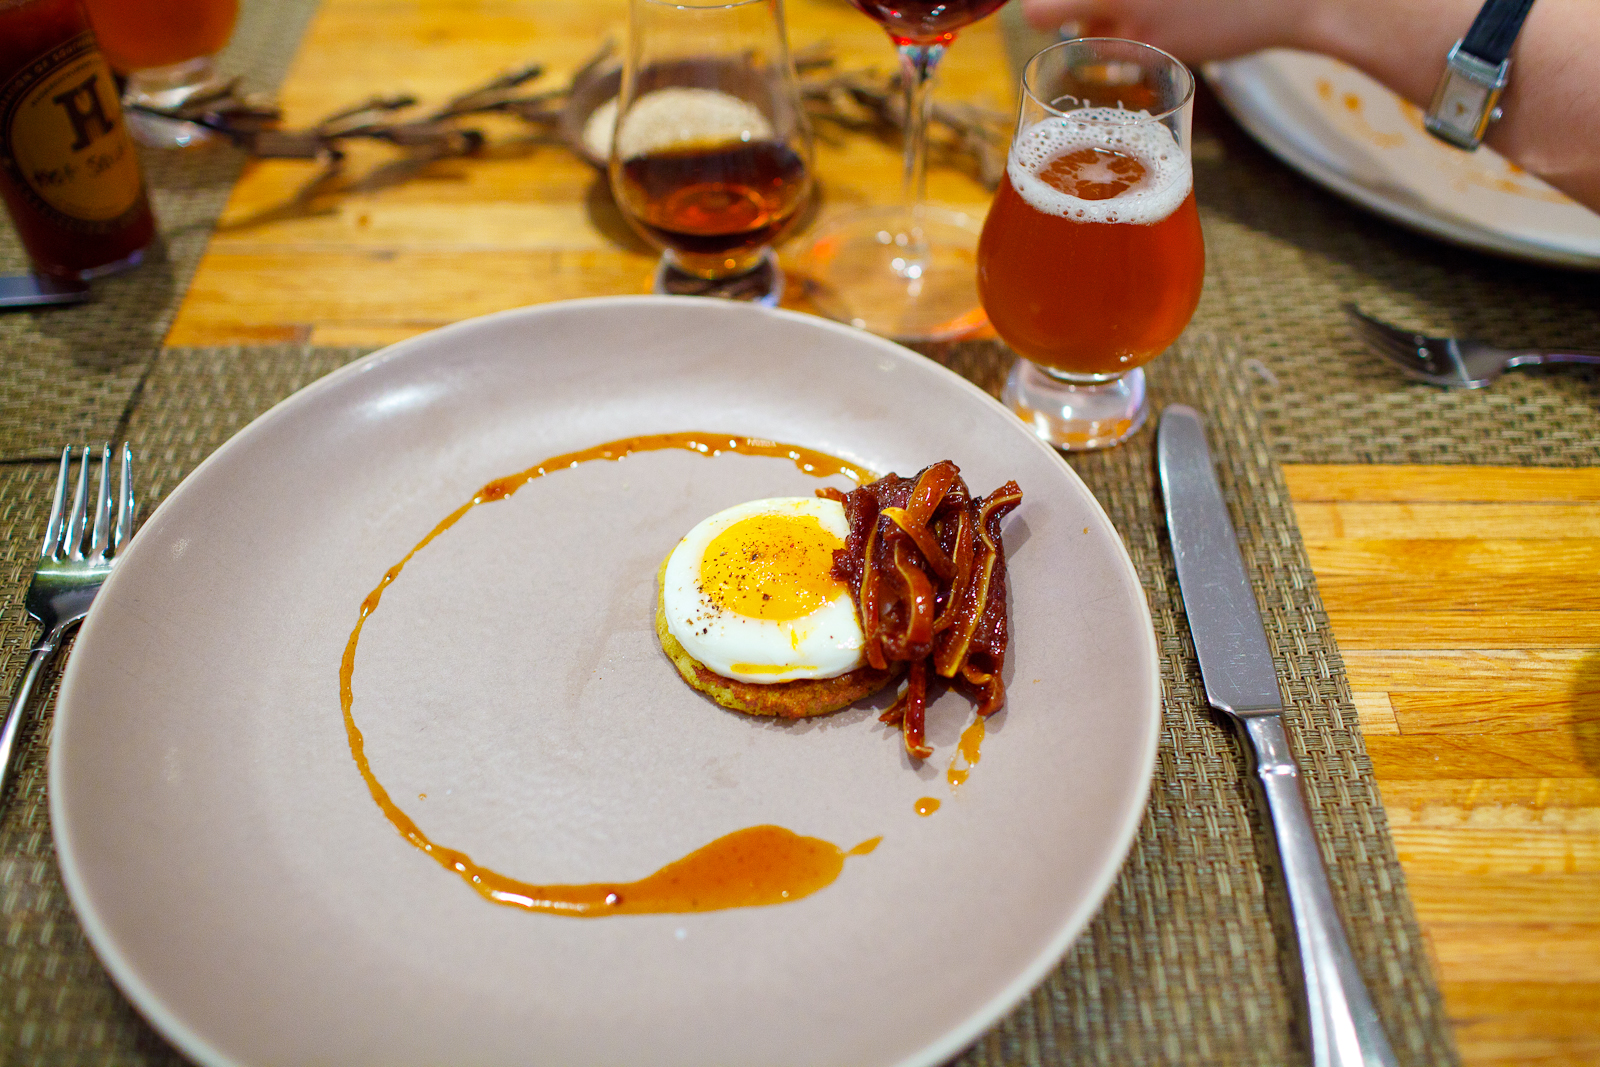 8th Course: Sunny-side up egg on a johnny cake with pig ears.